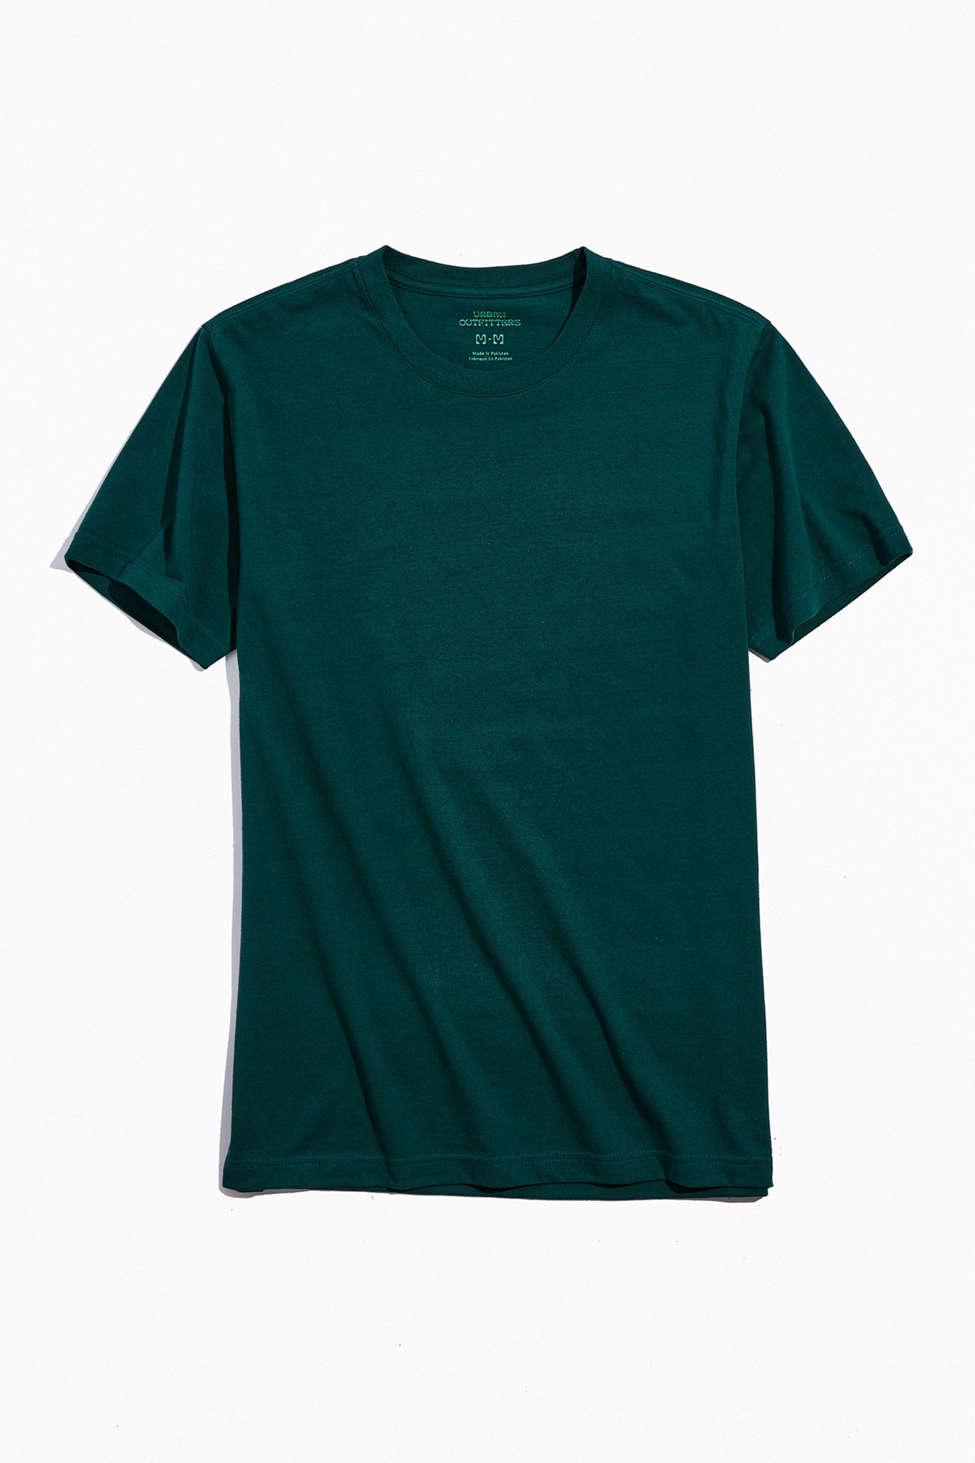 Branded and Logo T-Shirts for Men, Urban Outfitters